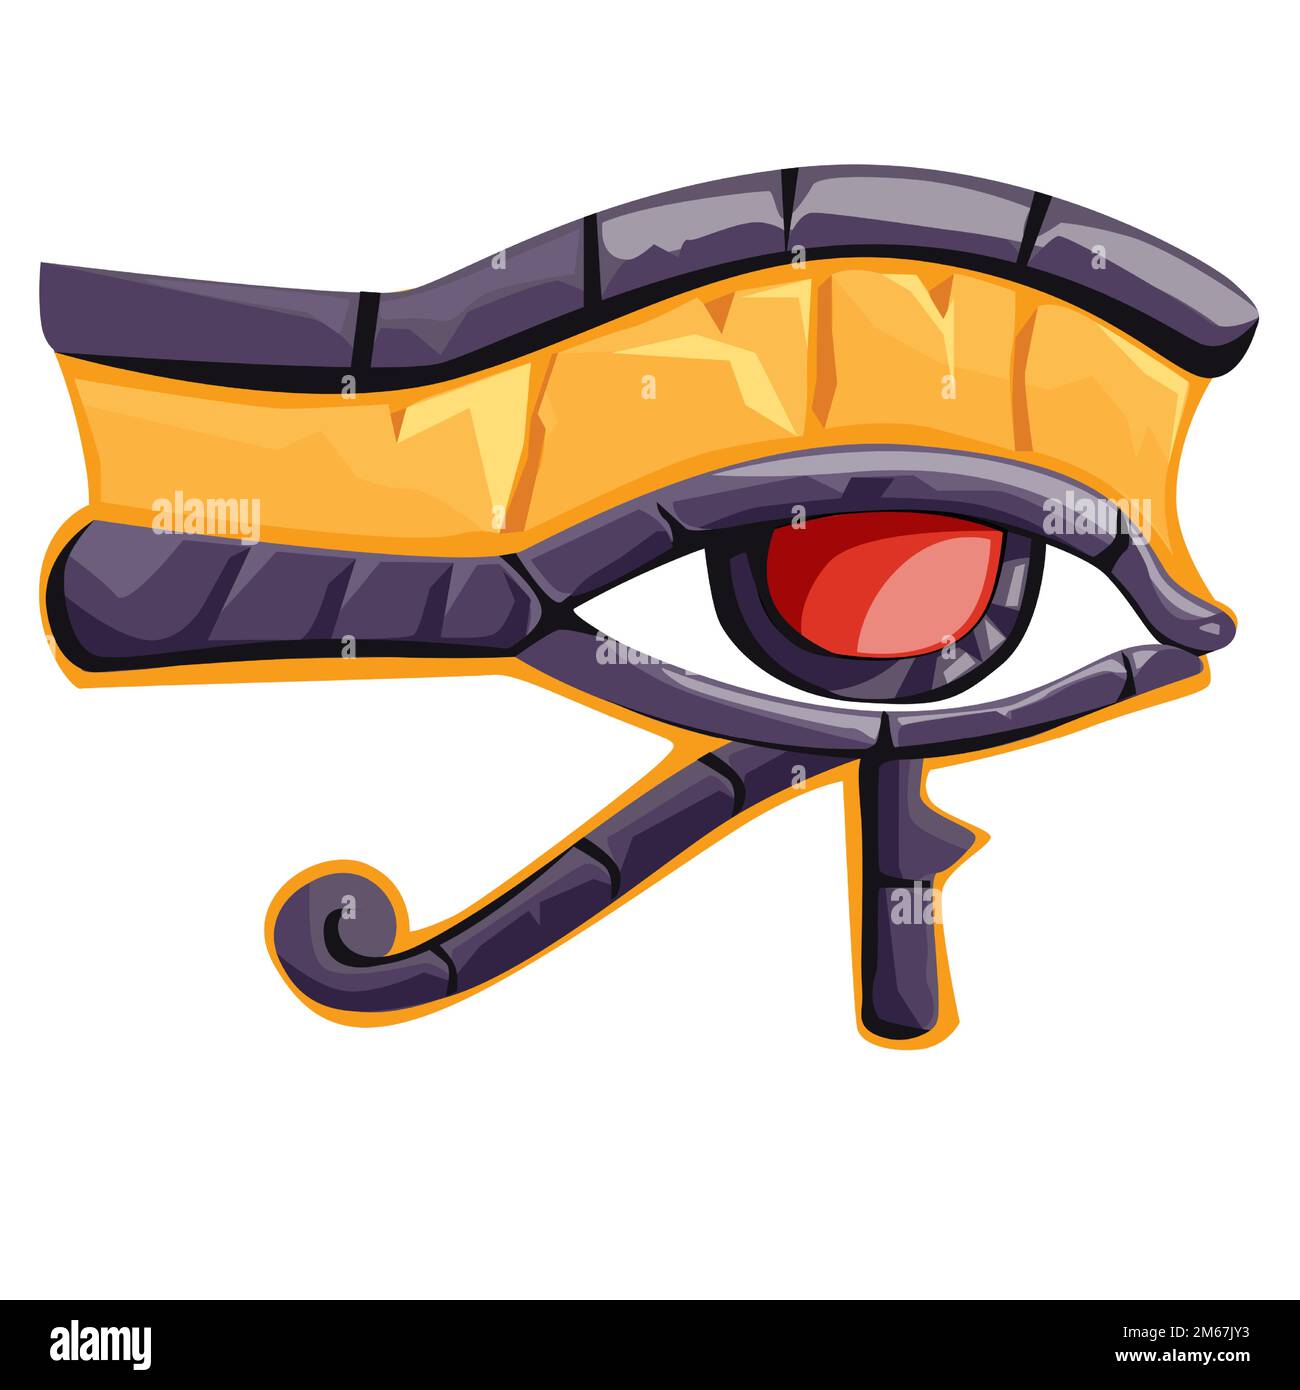 Eye of Horus or Ra or wadjet, ancient Egyptian religious symbol cartoon vector illustration. Falcon eye of sun god, protective amulet symbol of royalty Stock Vector